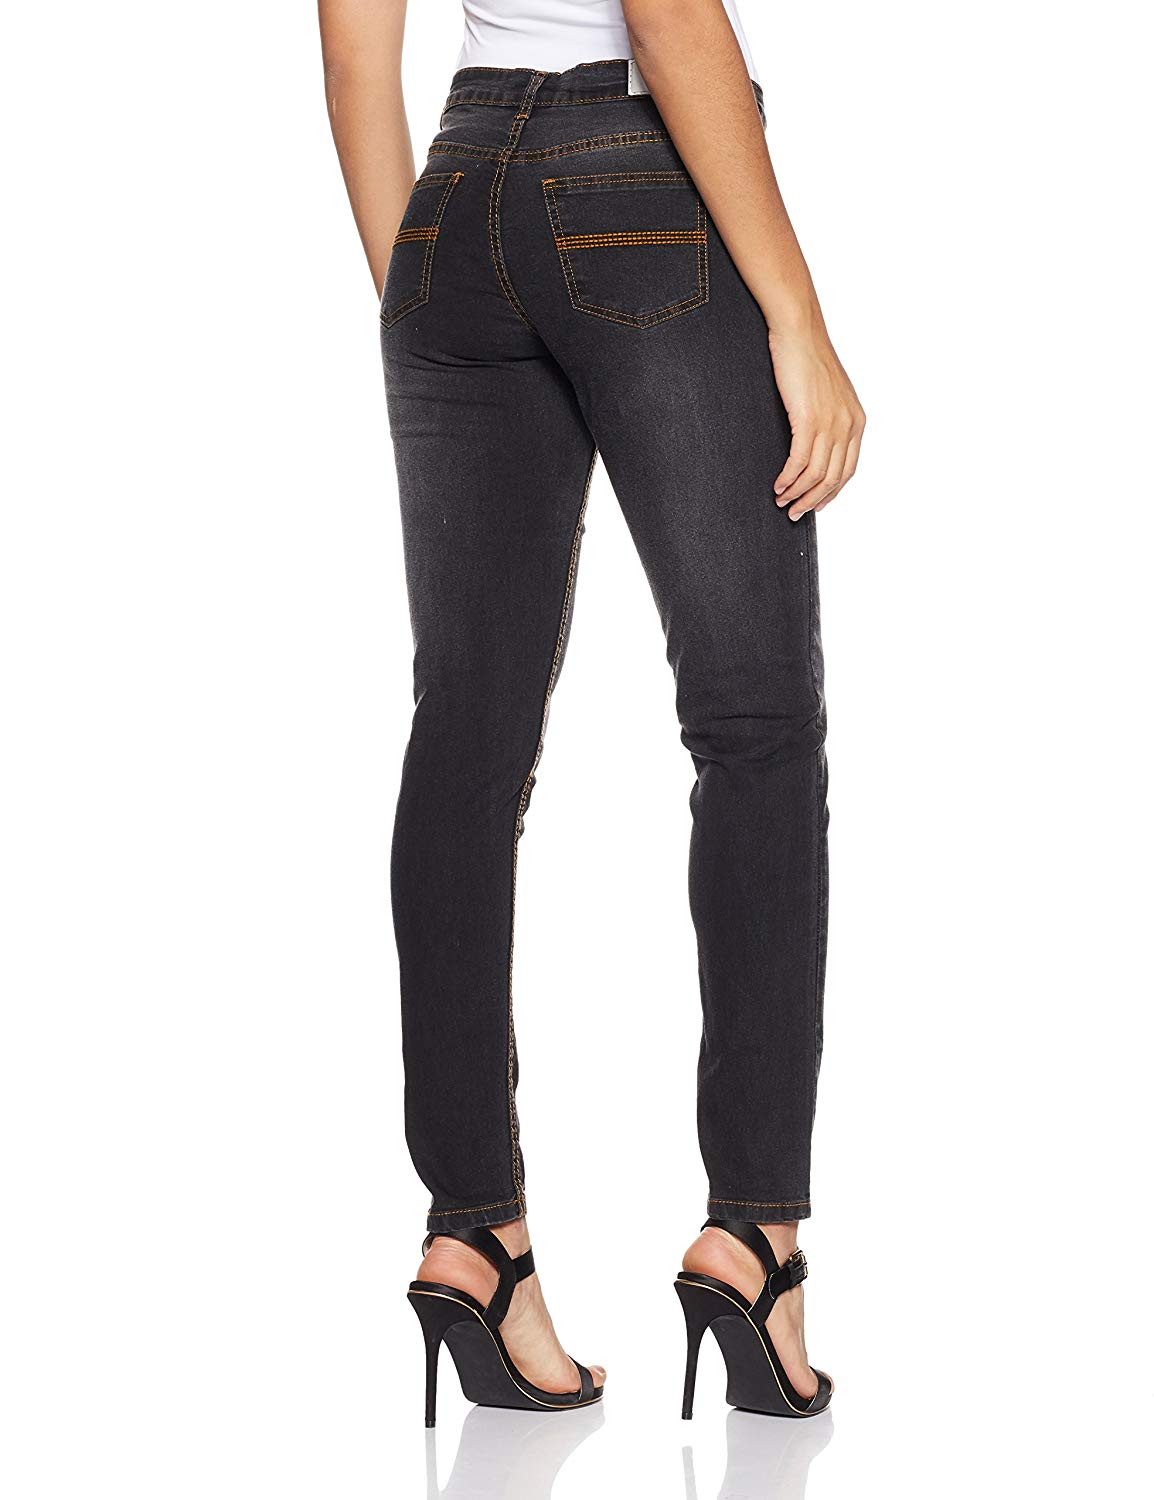 Aamzon - Women's Jeans Minimum 60% Discount Starting From Rs.277